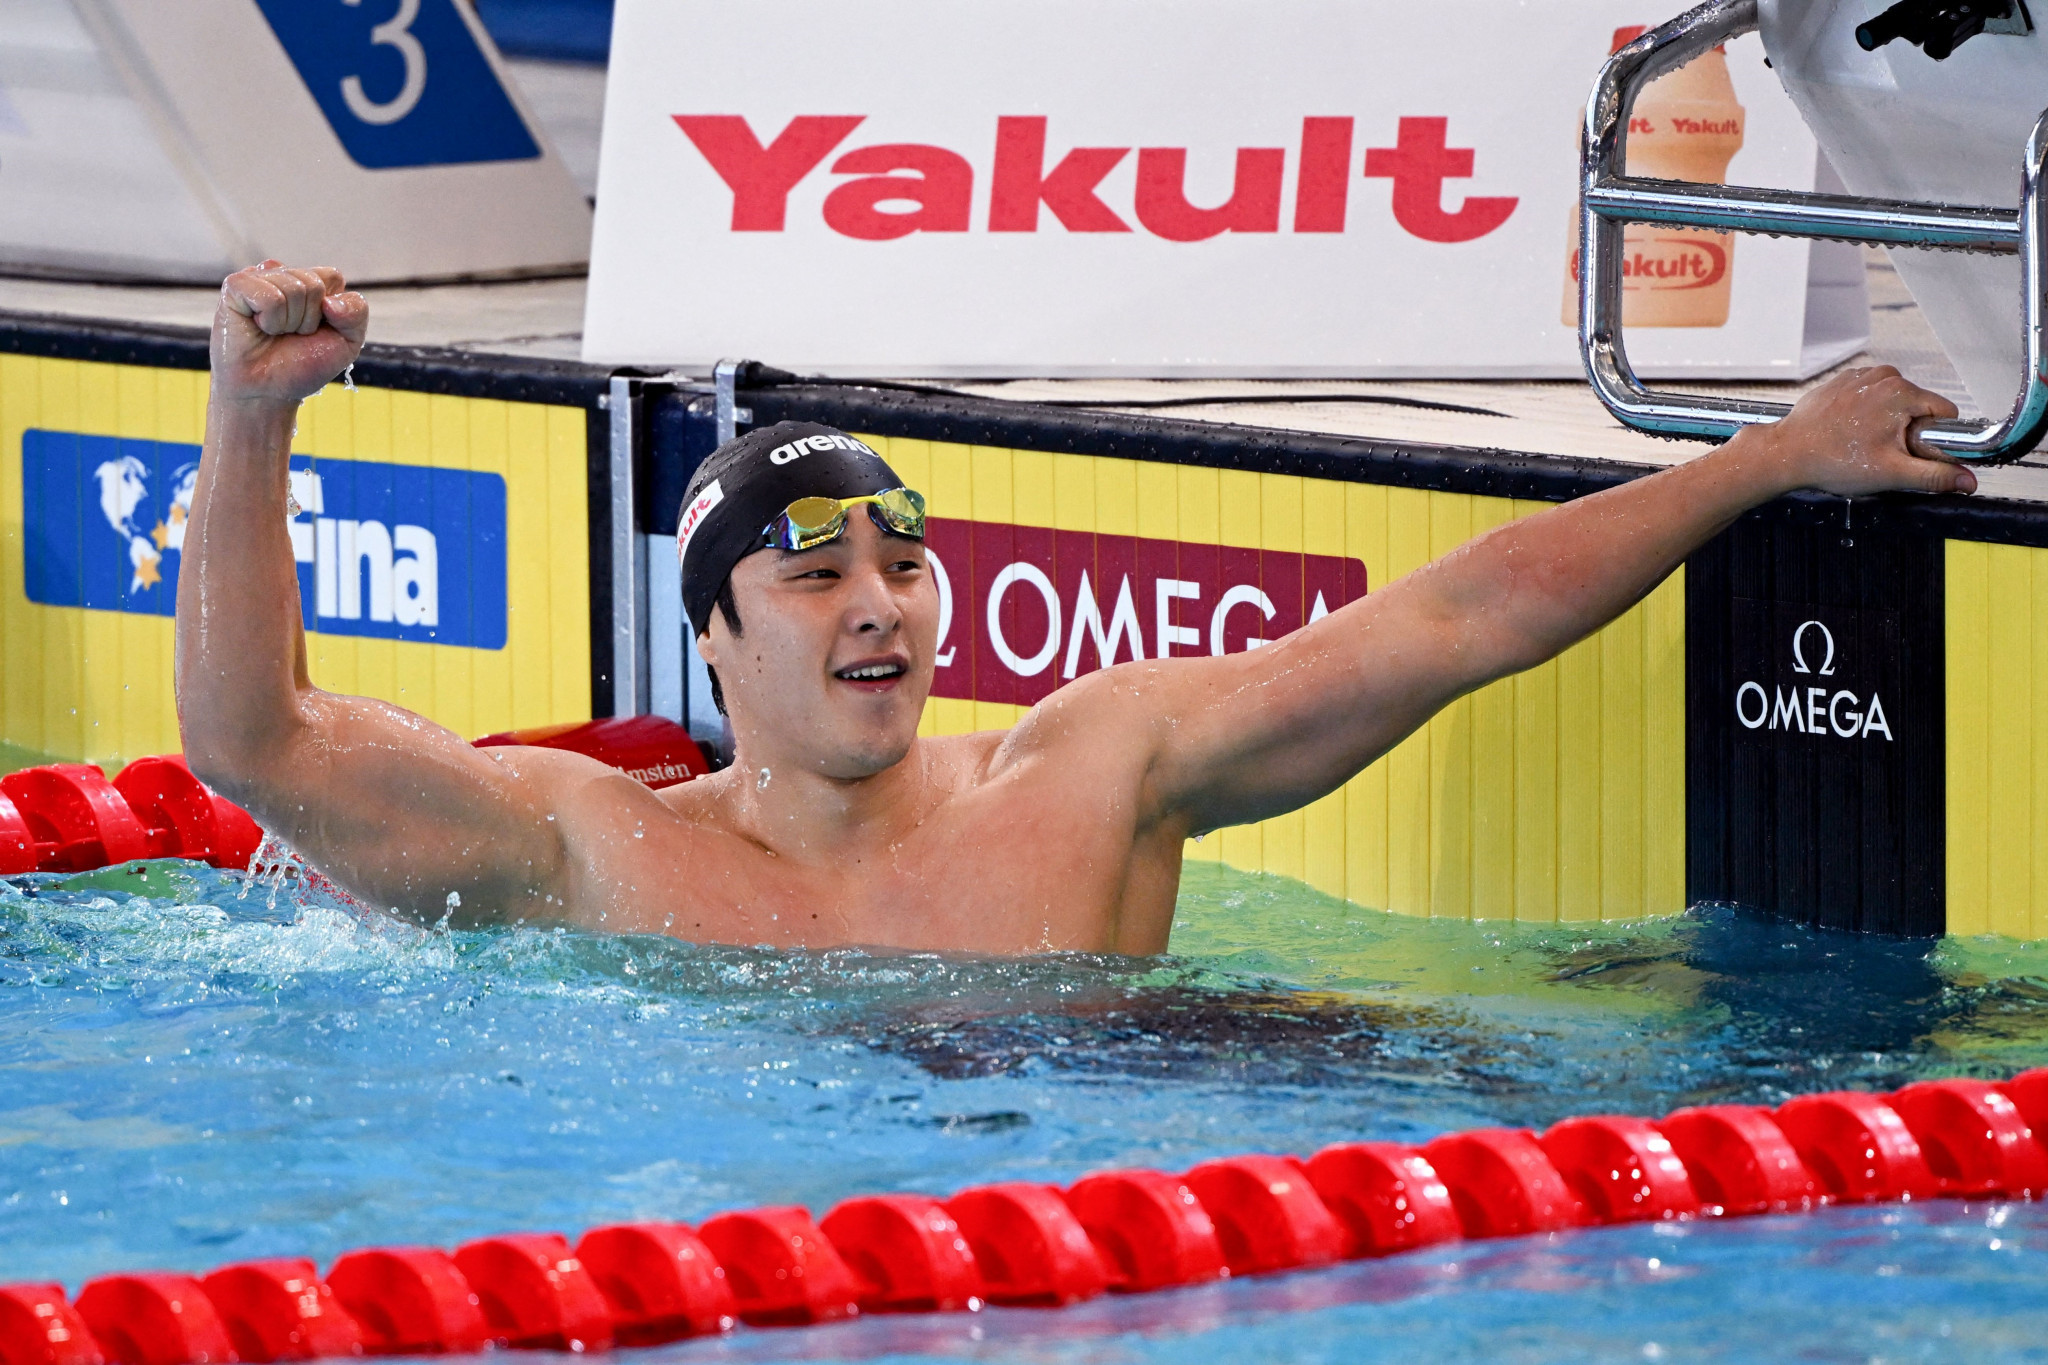 Japan’s Daiya Seto secured the eighth world short-course title of his career ©Getty Images